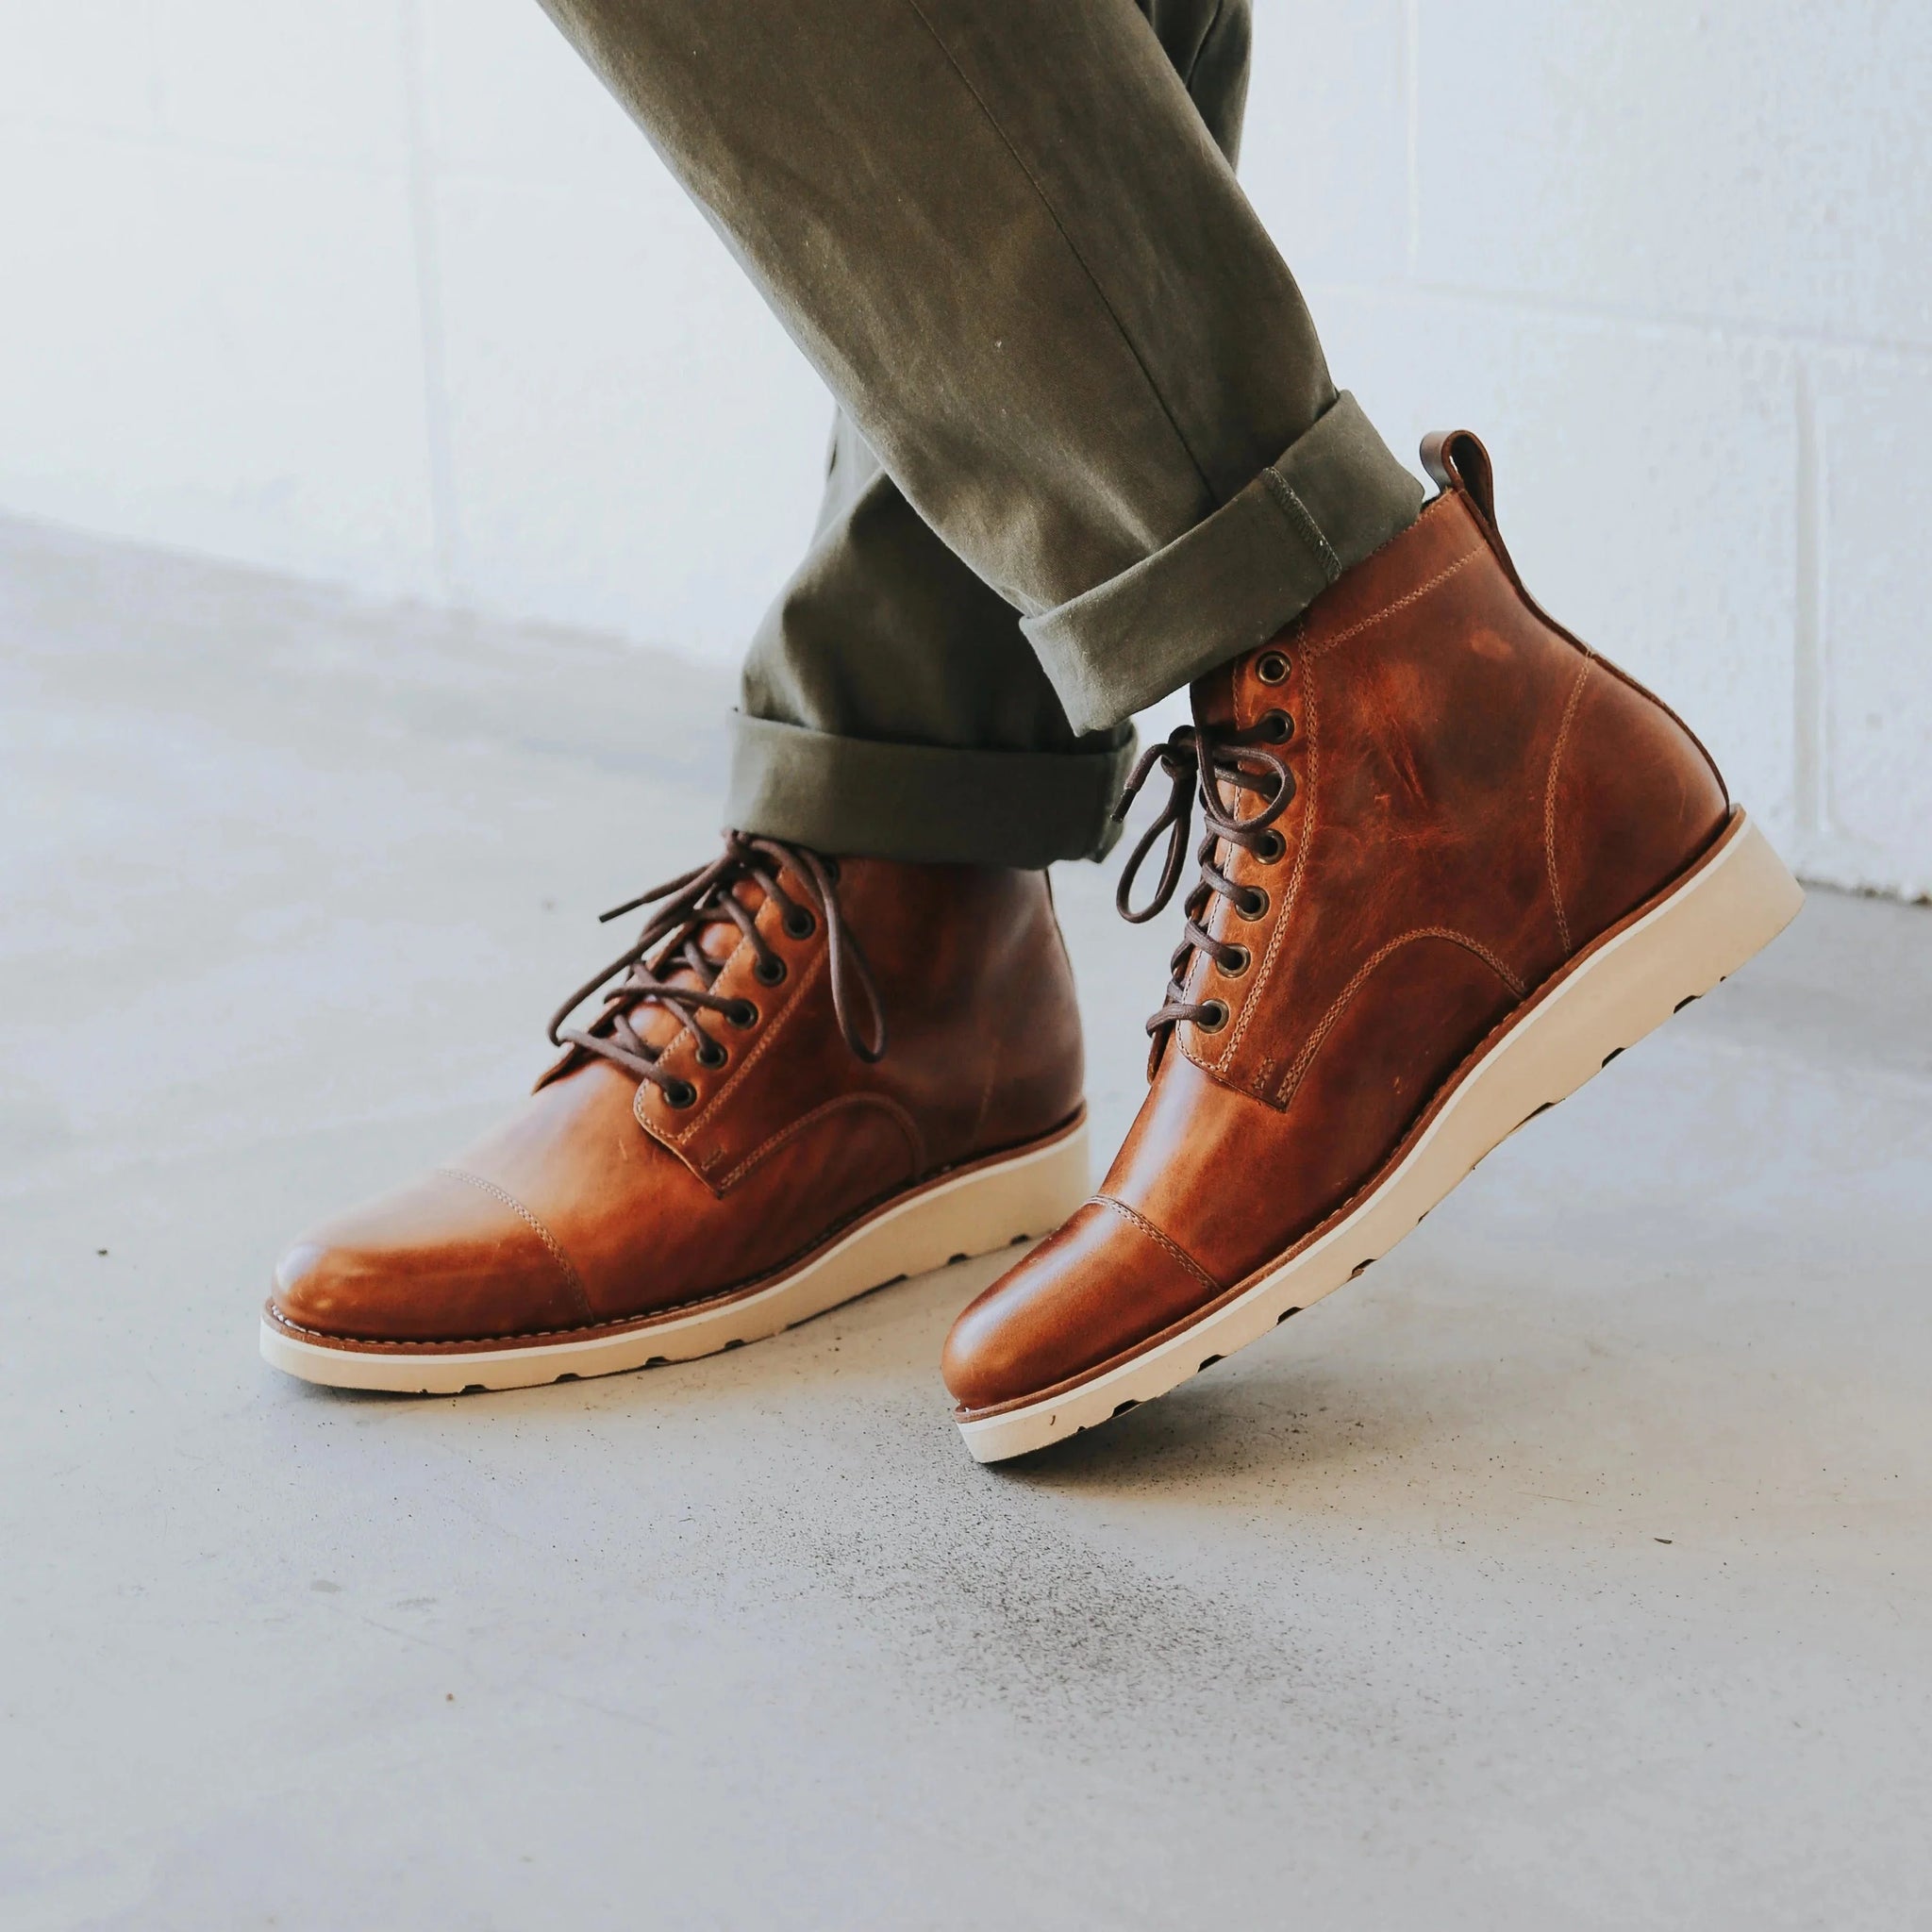 The Lou Teak by HELM Boots